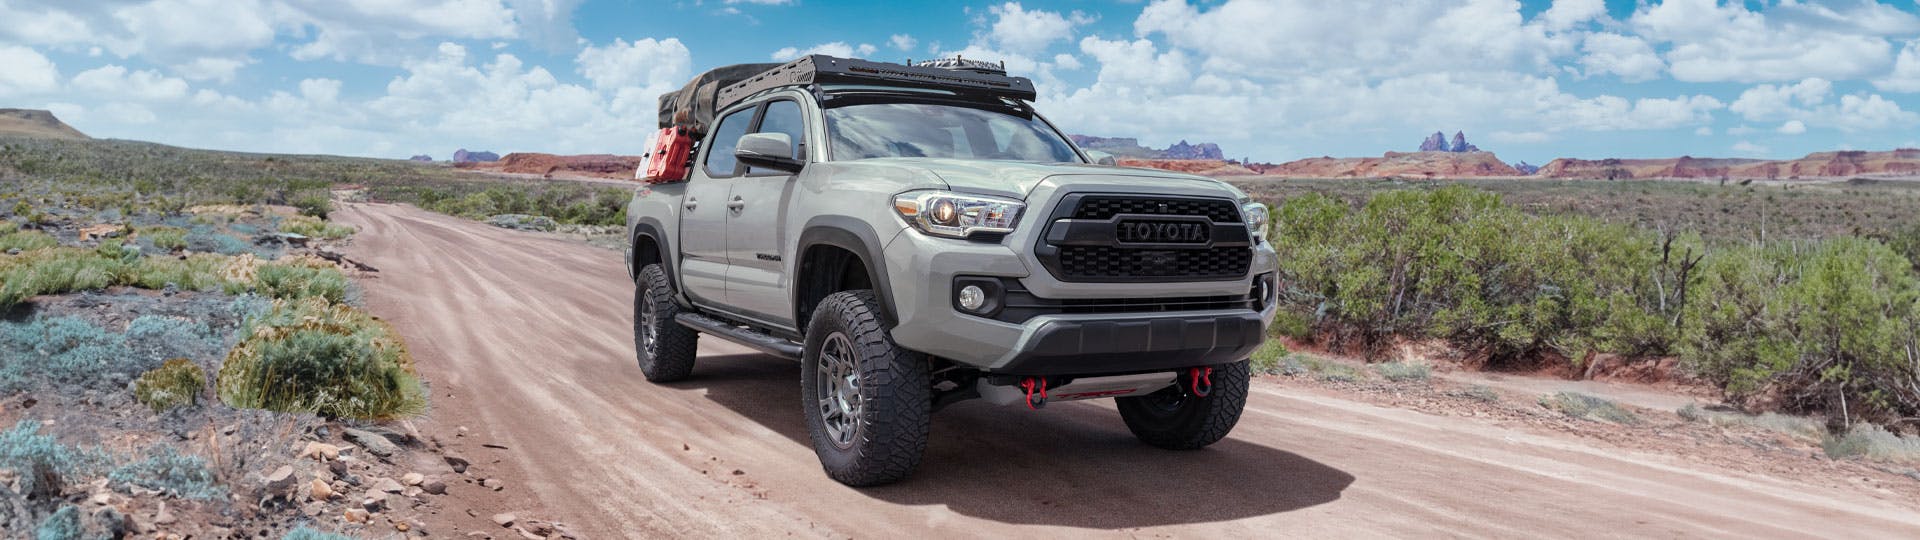 Toyota Tacoma on dirt road